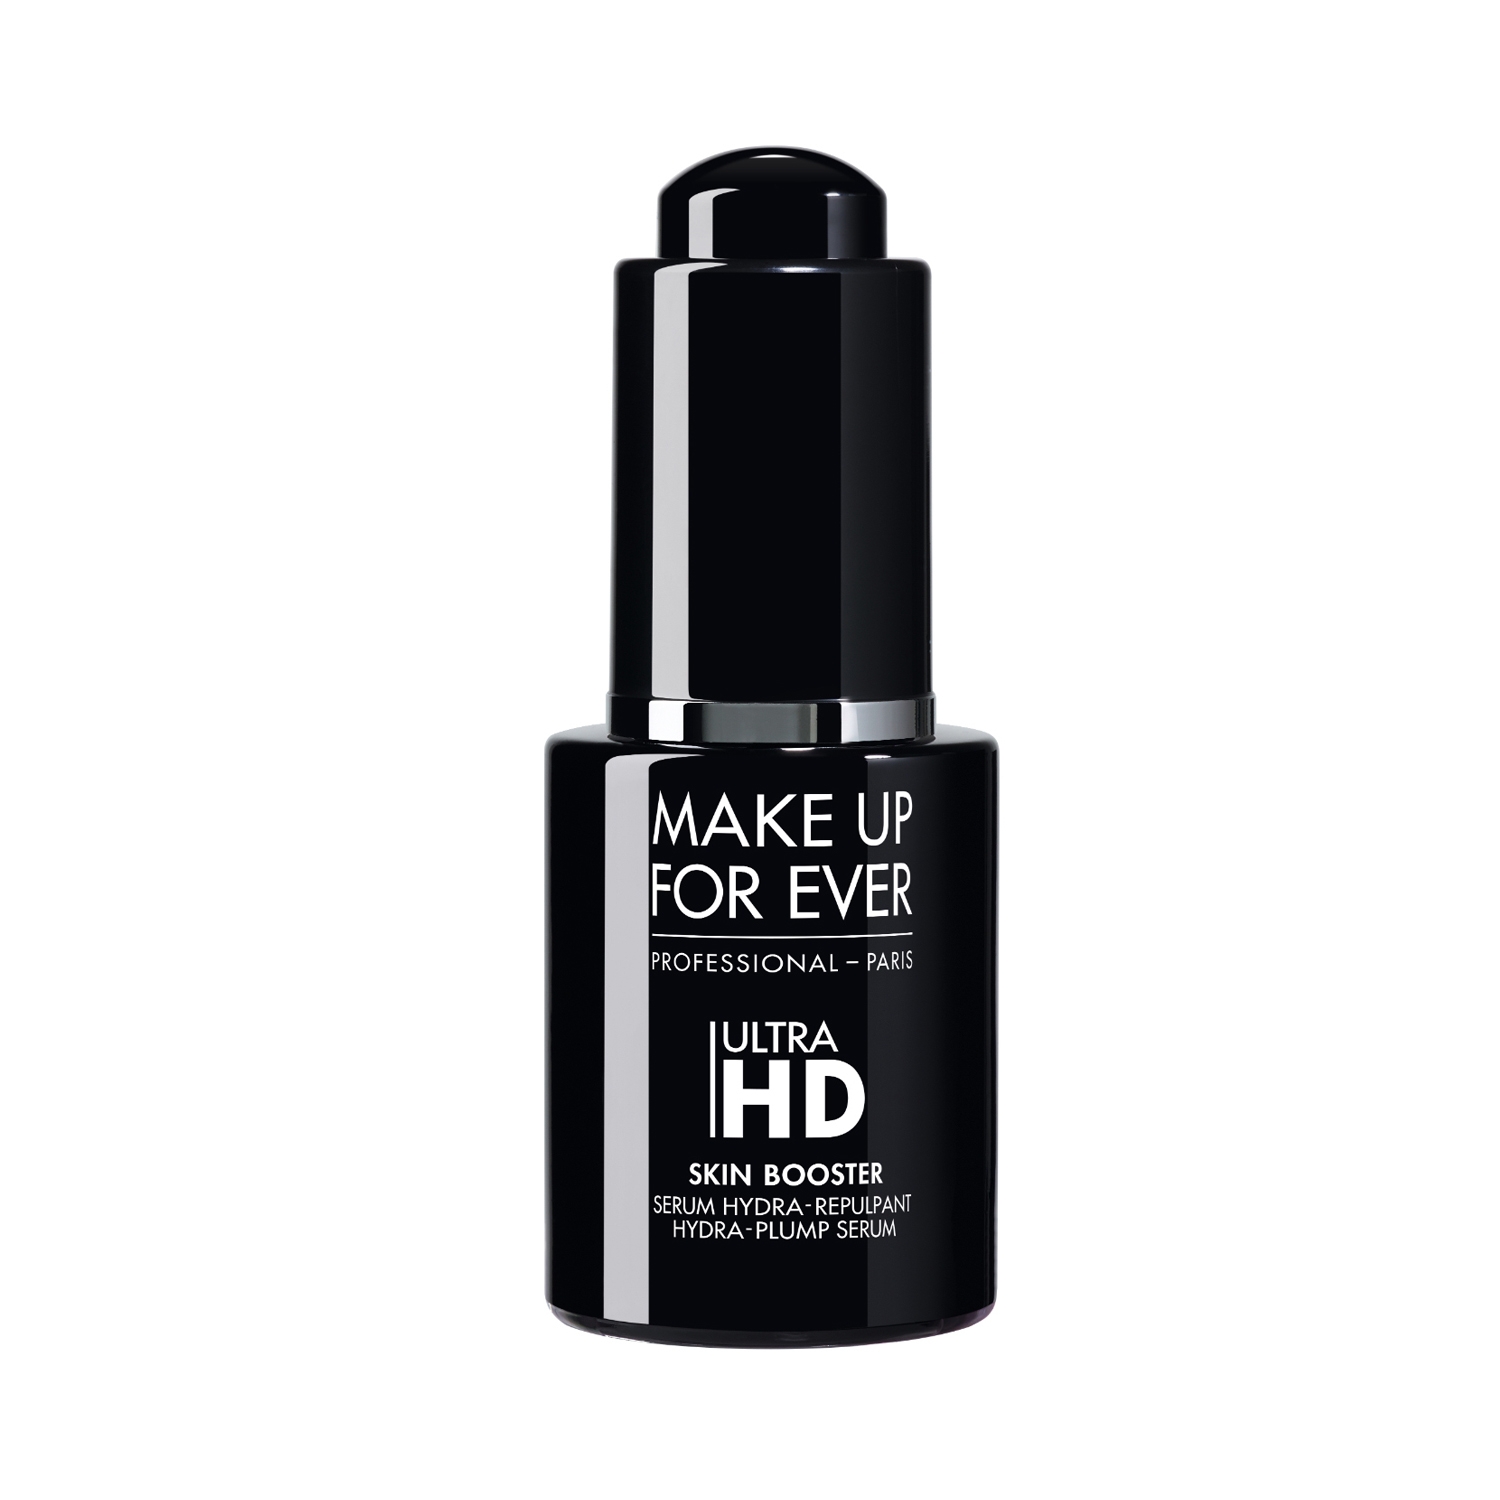 Make Up For Ever | Make Up For Ever Ultra Hd Skin Booster Hydra Plump Serum (12ml)